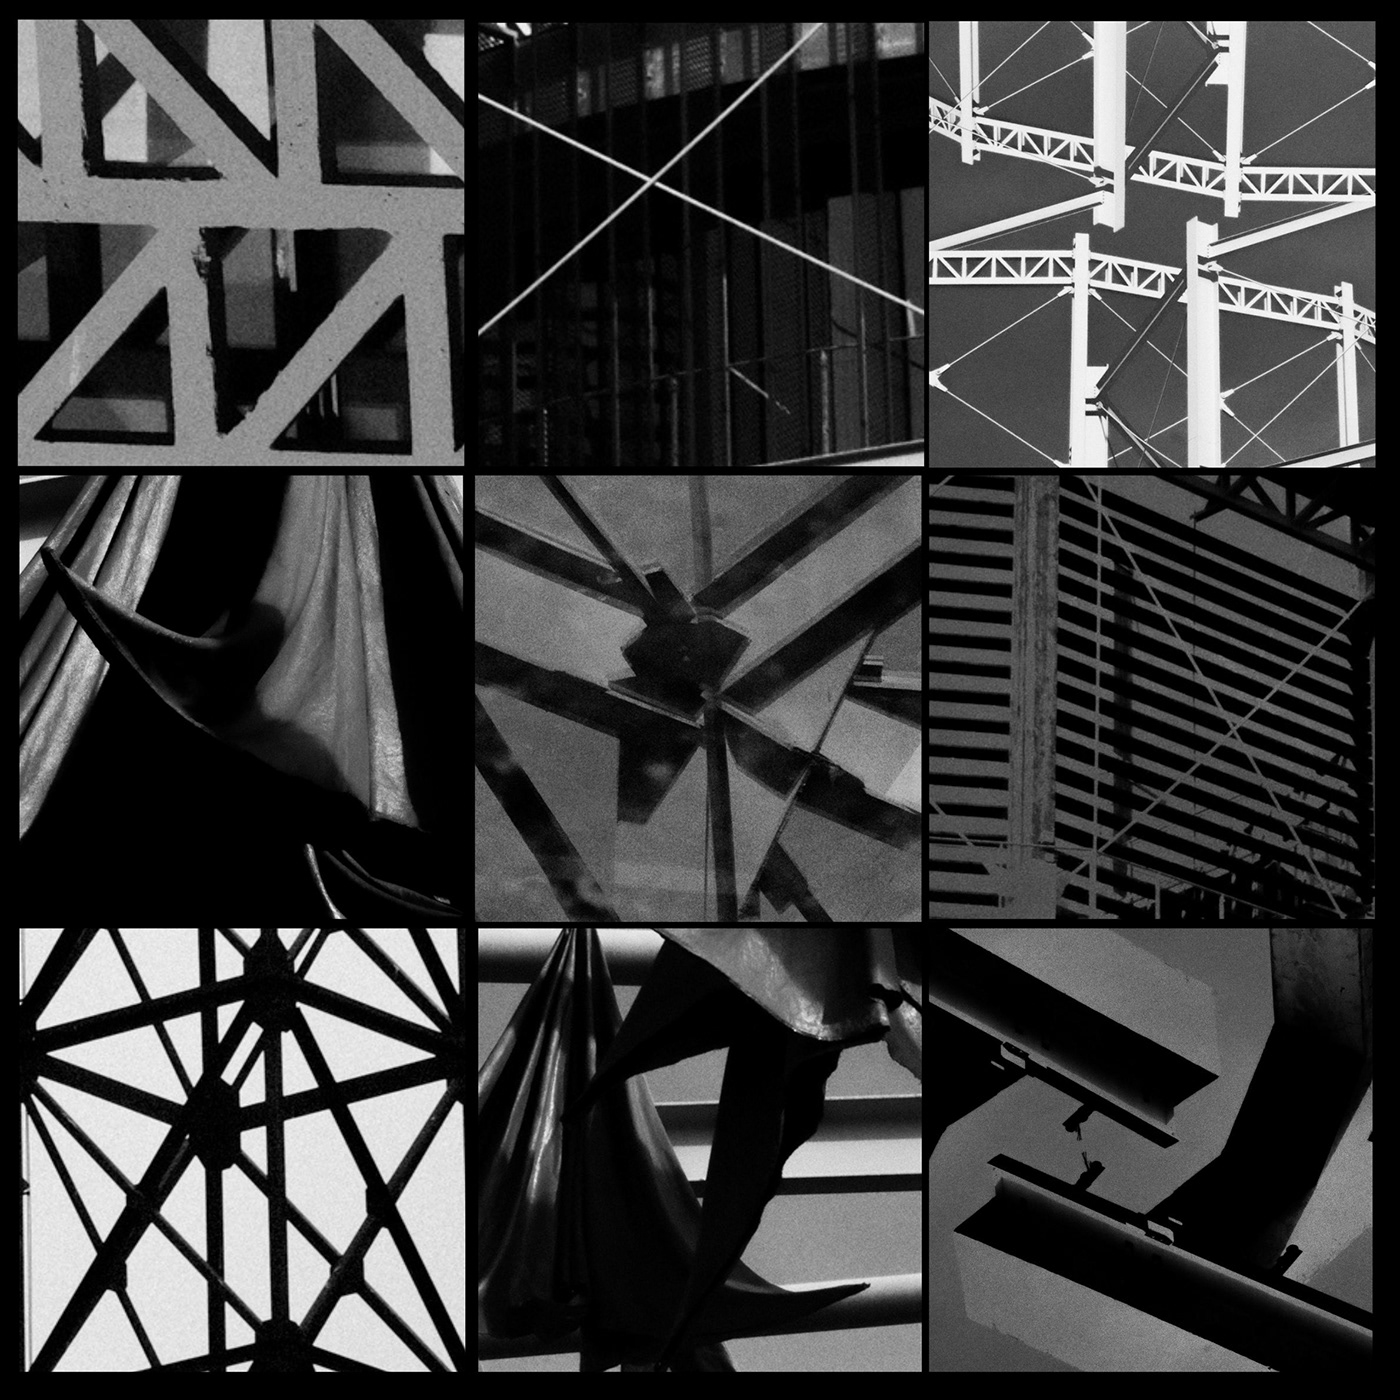 black and white collage collage art Photography  architecture architectural photography buildings city Urban street photography